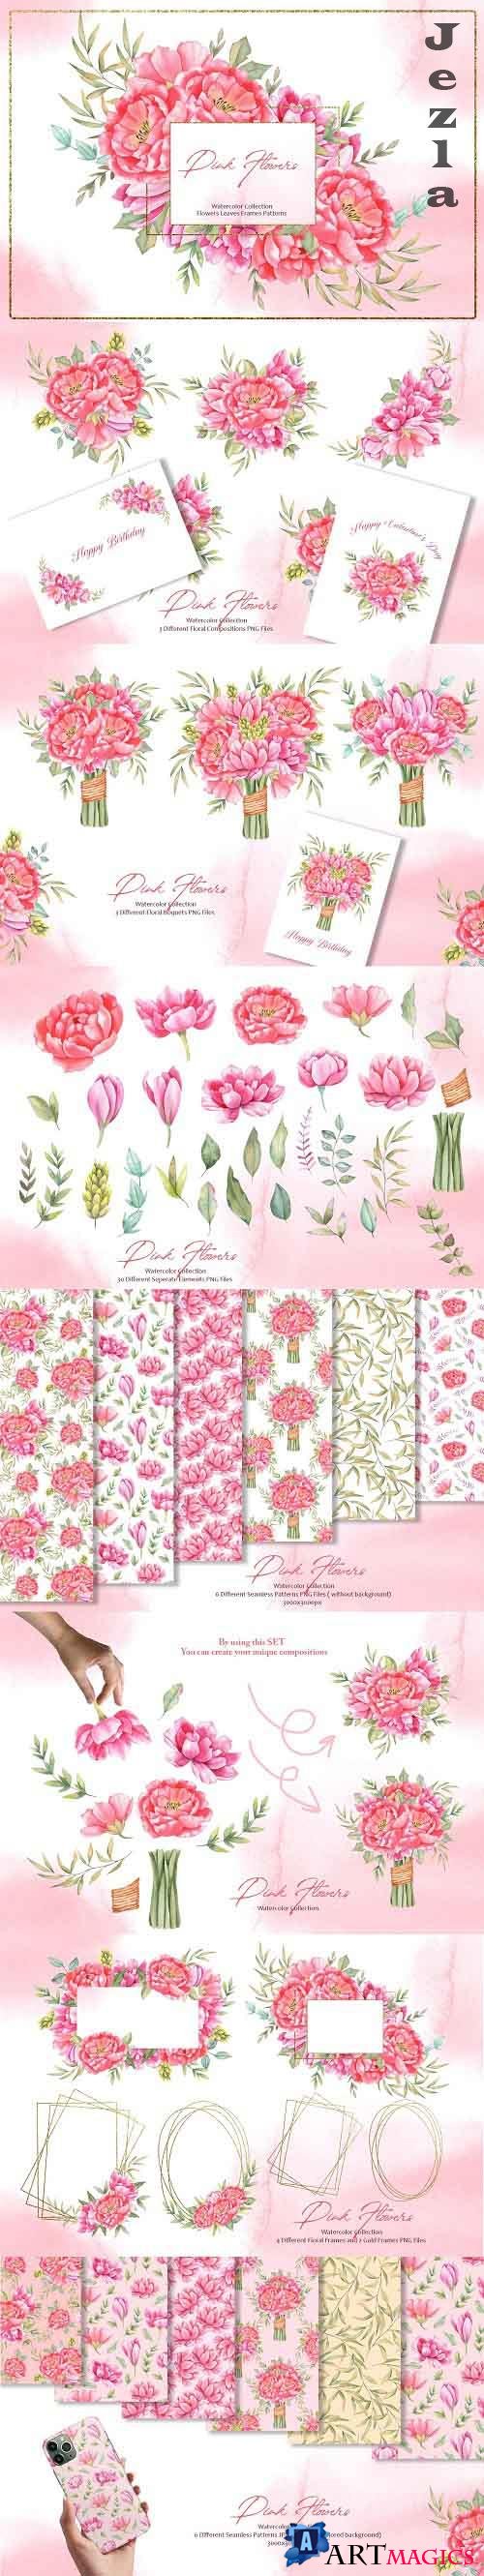 Watercolor Pink Flowers Collection - 5736669